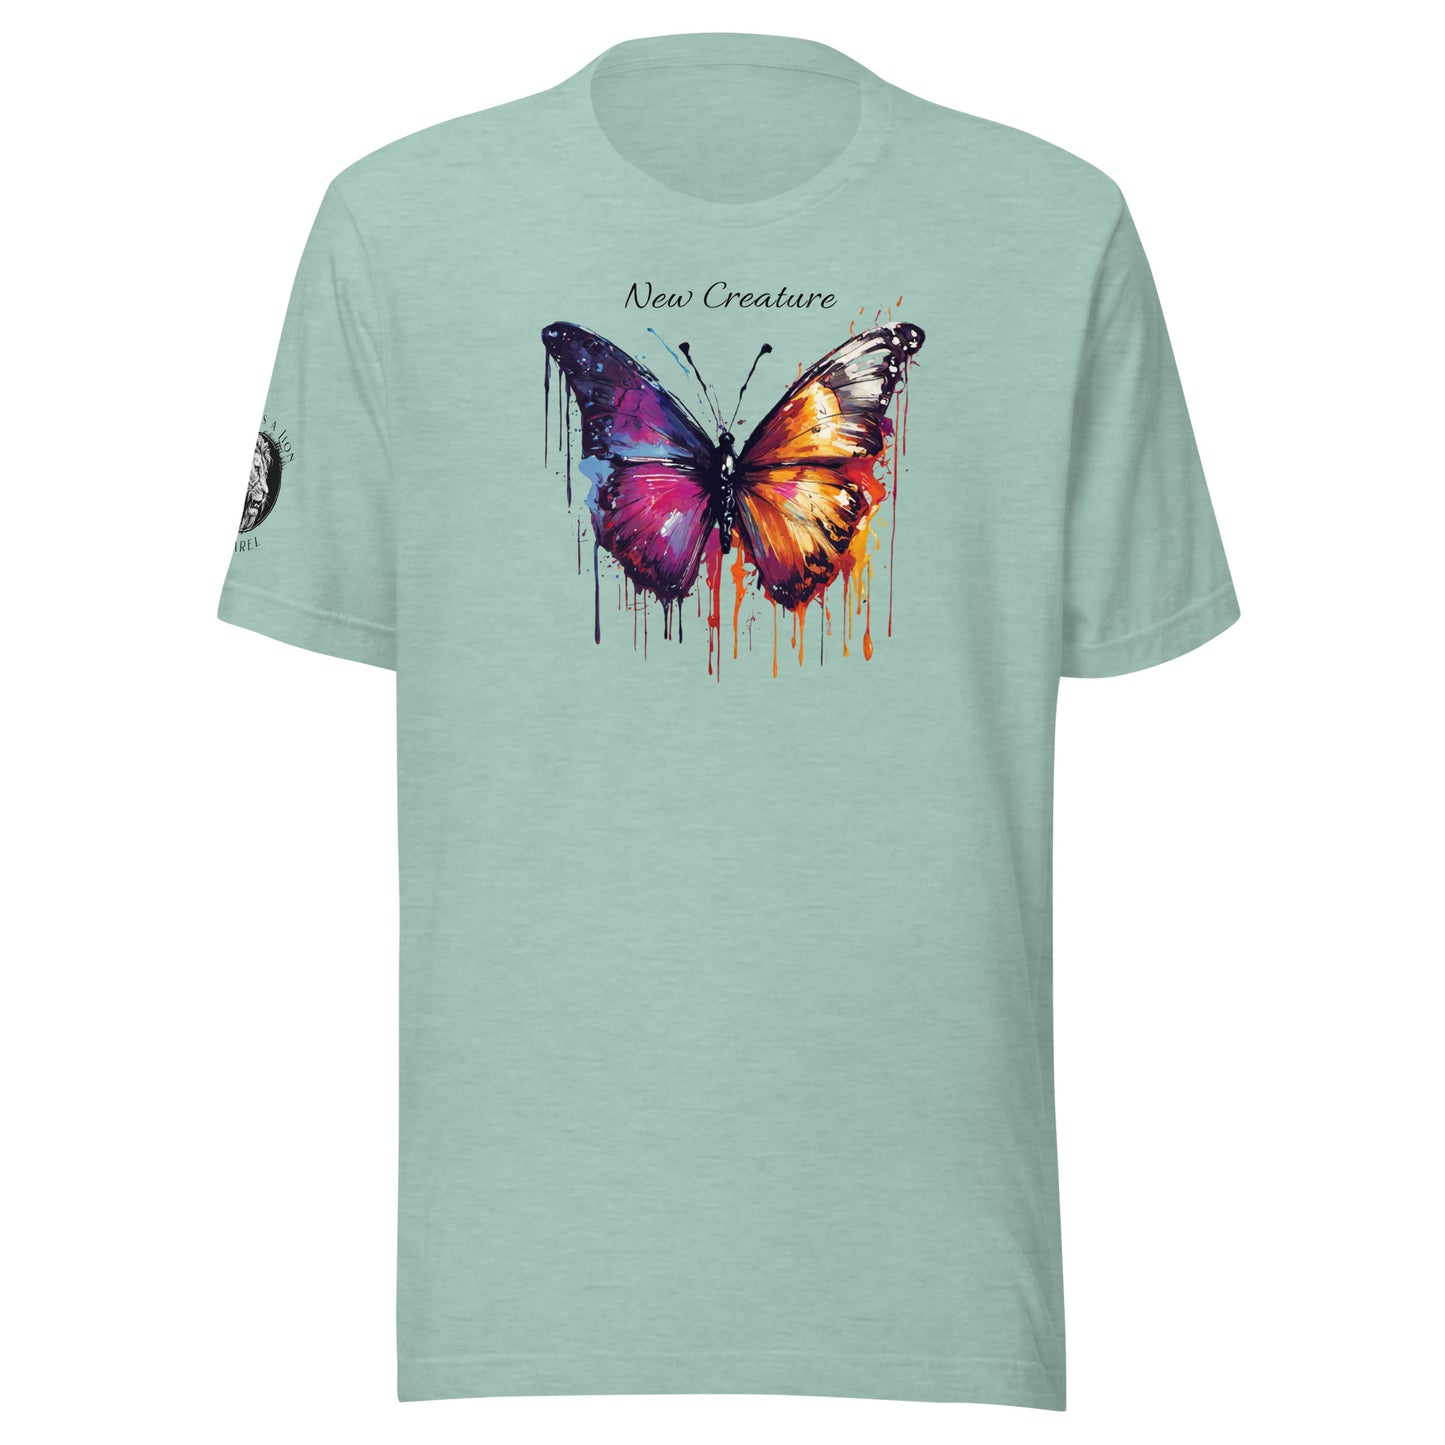 New Creature Christian Women's Beautiful Graphic Classic T-Shirt Heather Prism Dusty Blue